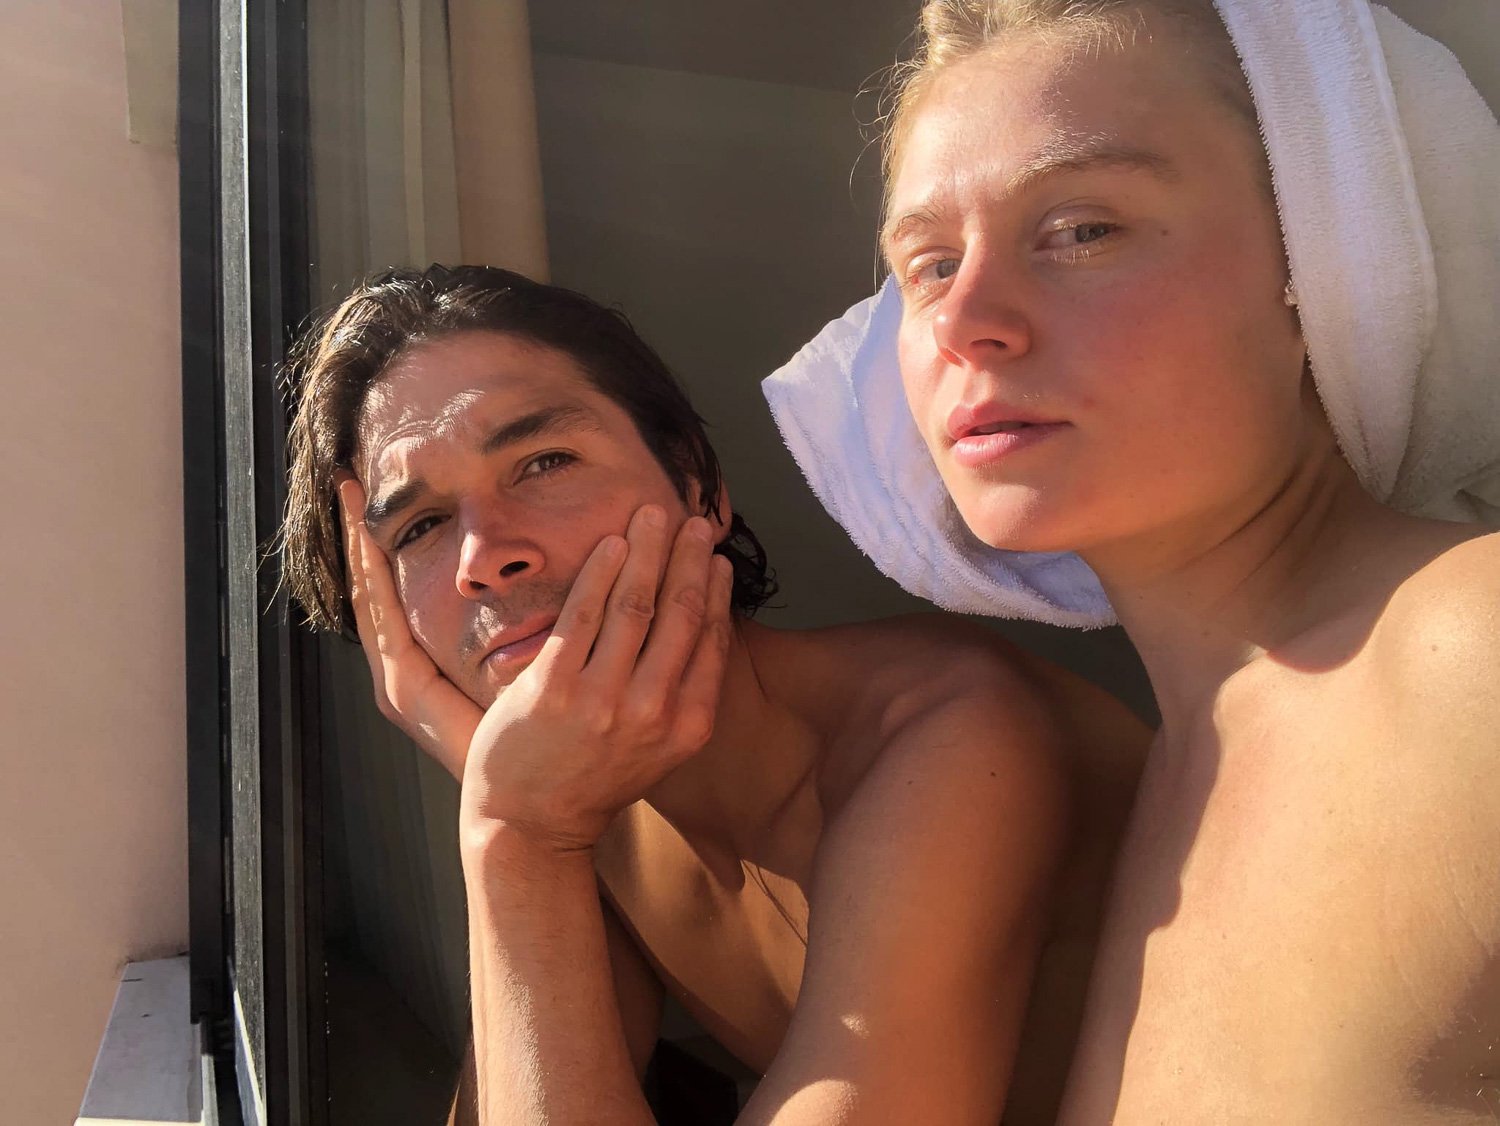 A topless couple staring out of a sunlit window